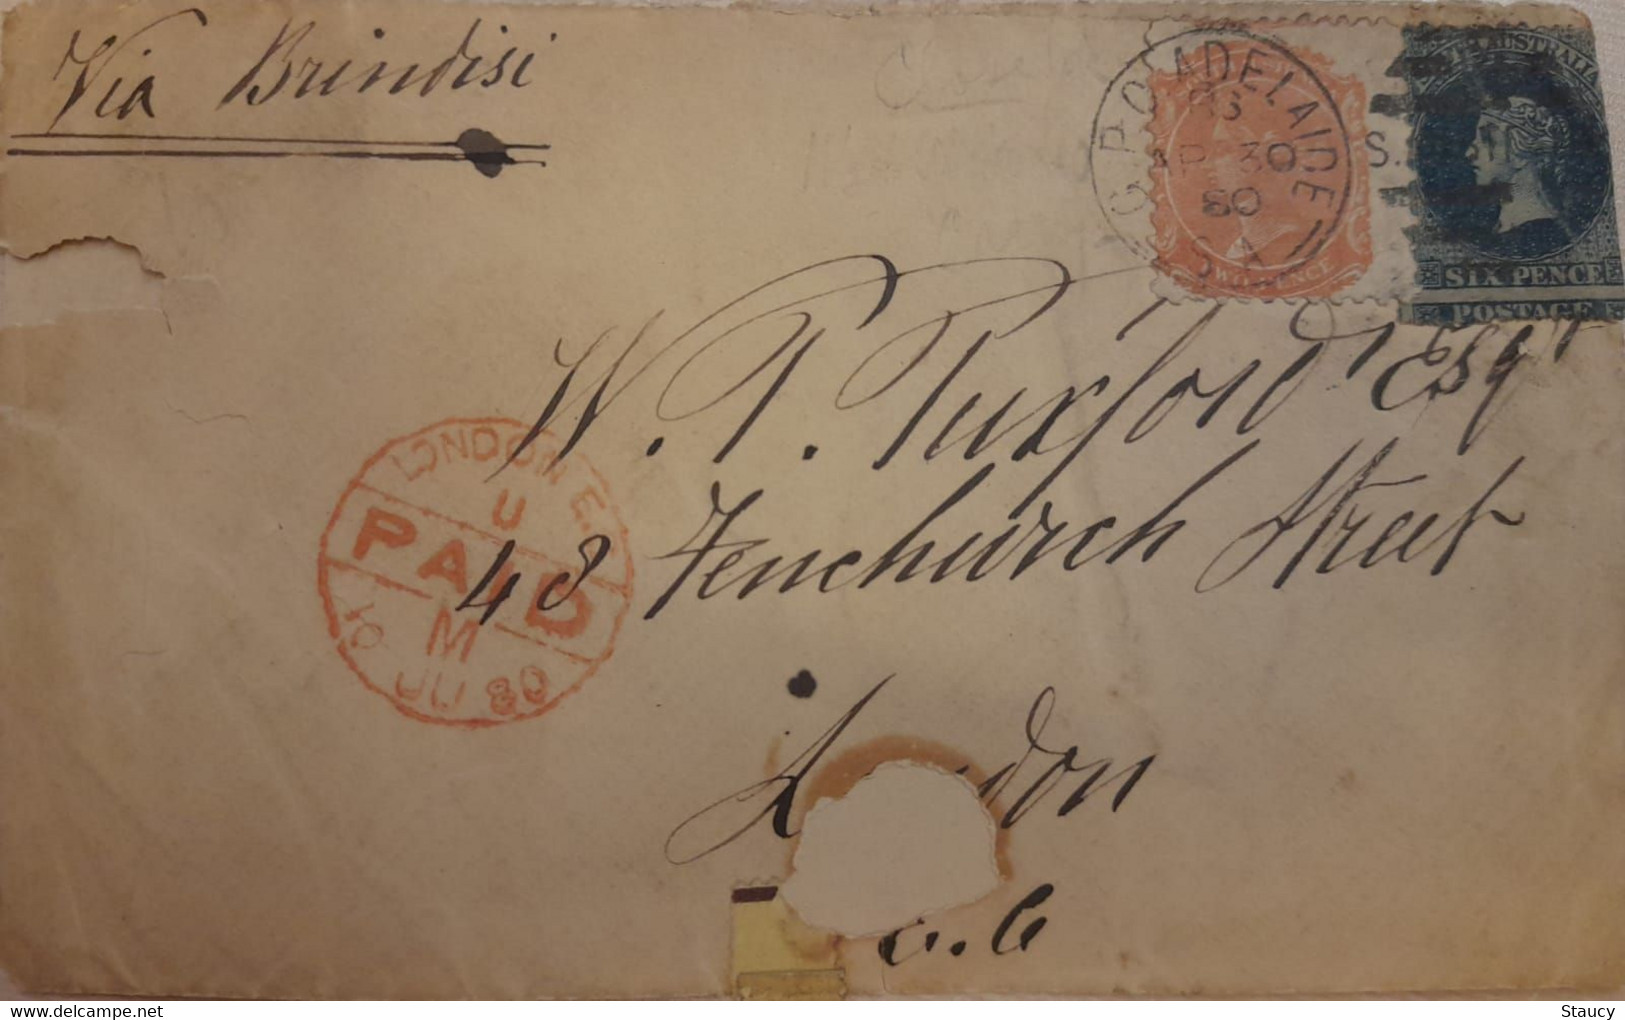 SOUTH AUSTRALIA 1880 QV 6d Blue + 2d ORANGE Franked On Cover Adelaide To LONDON Via Brindisi "LONDON PAID" As Per Scan - Covers & Documents